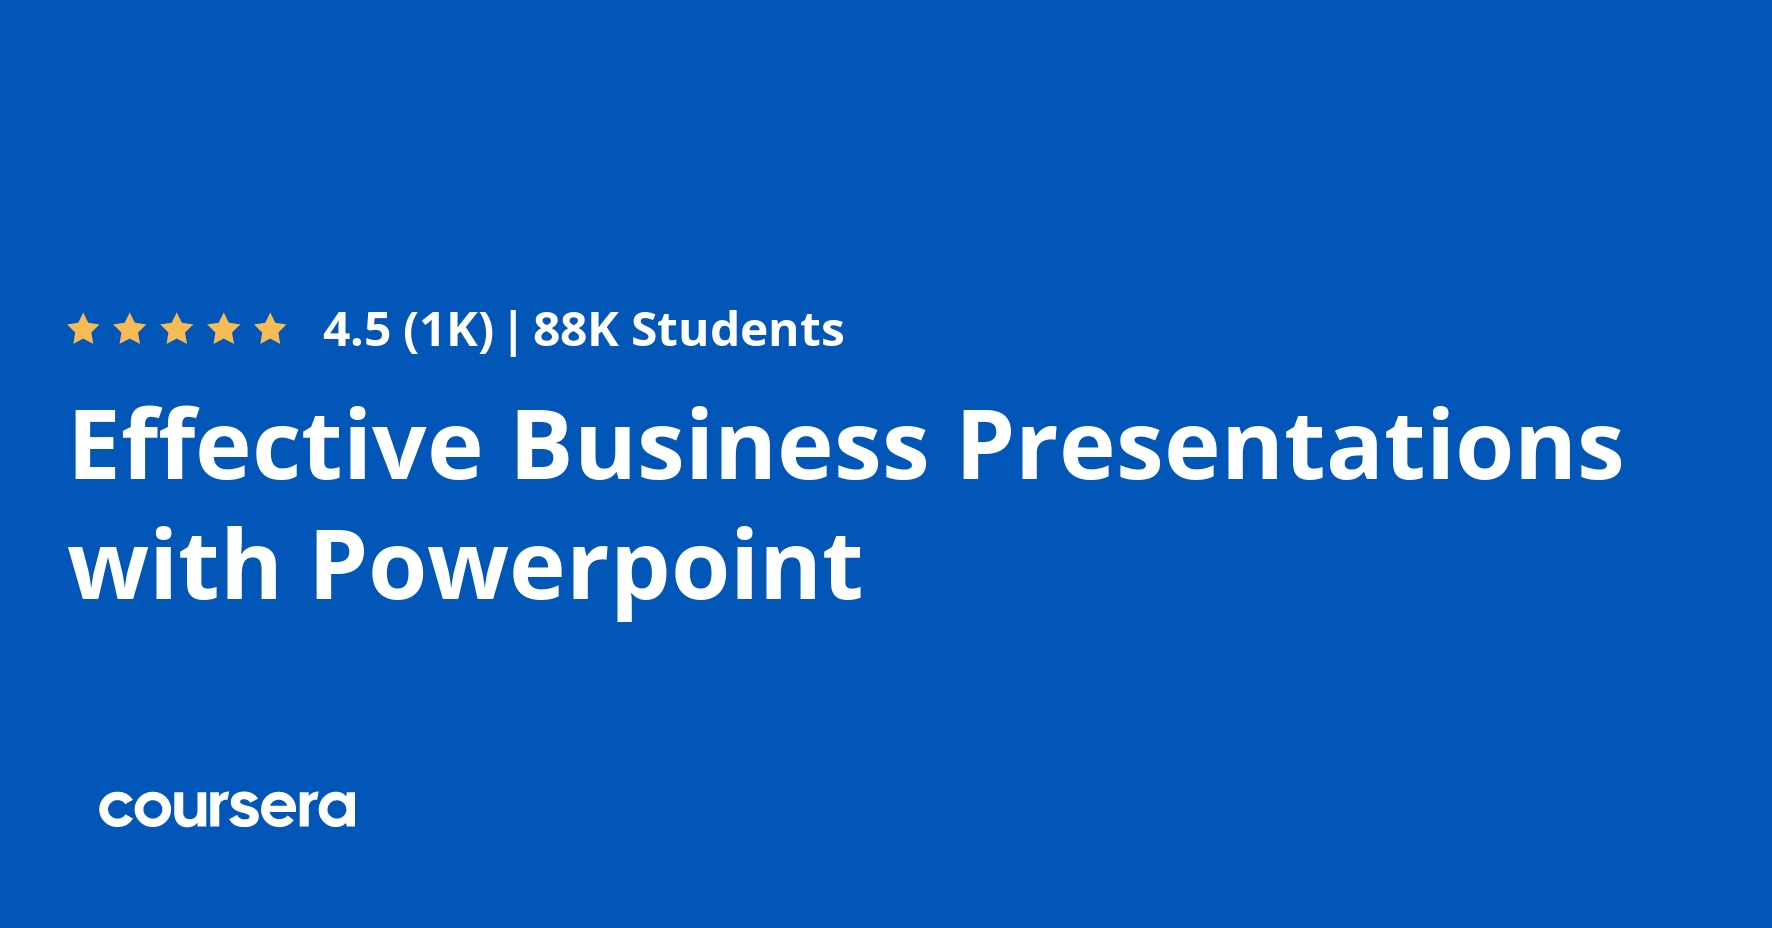 coursera effective business presentations with powerpoint